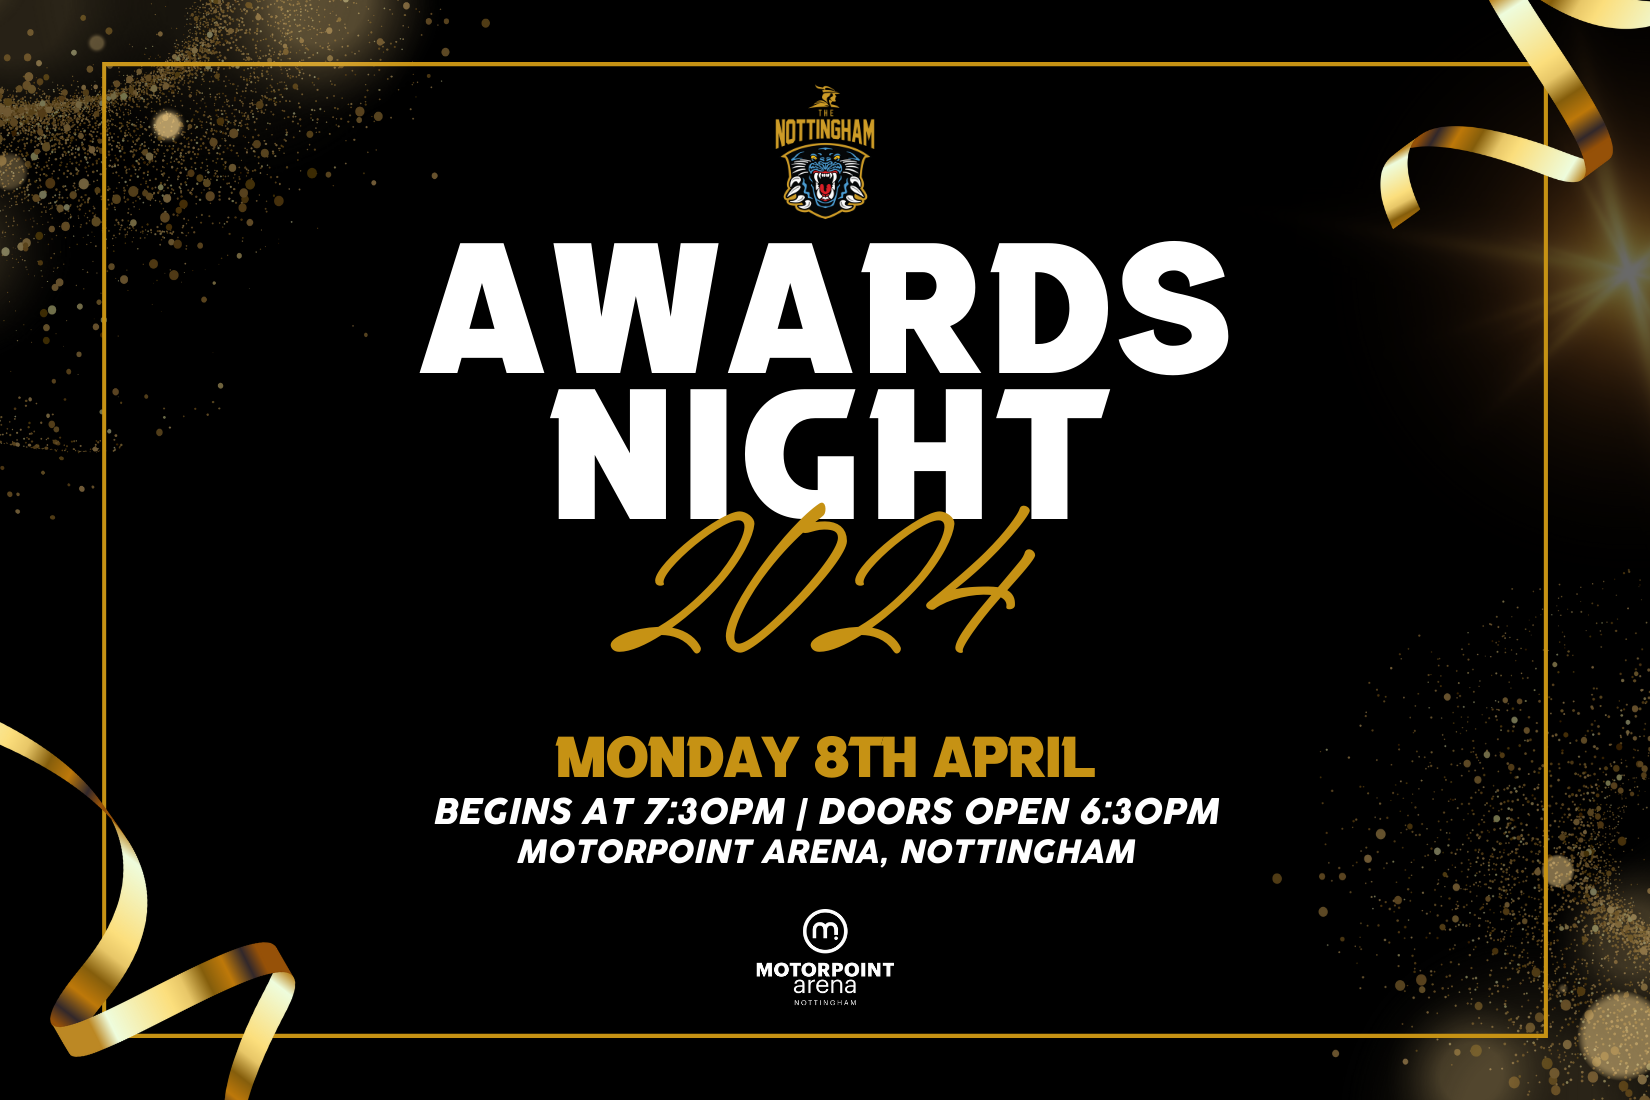 FULL DETAILS ON MONDAY'S AWARDS NIGHT Top Image